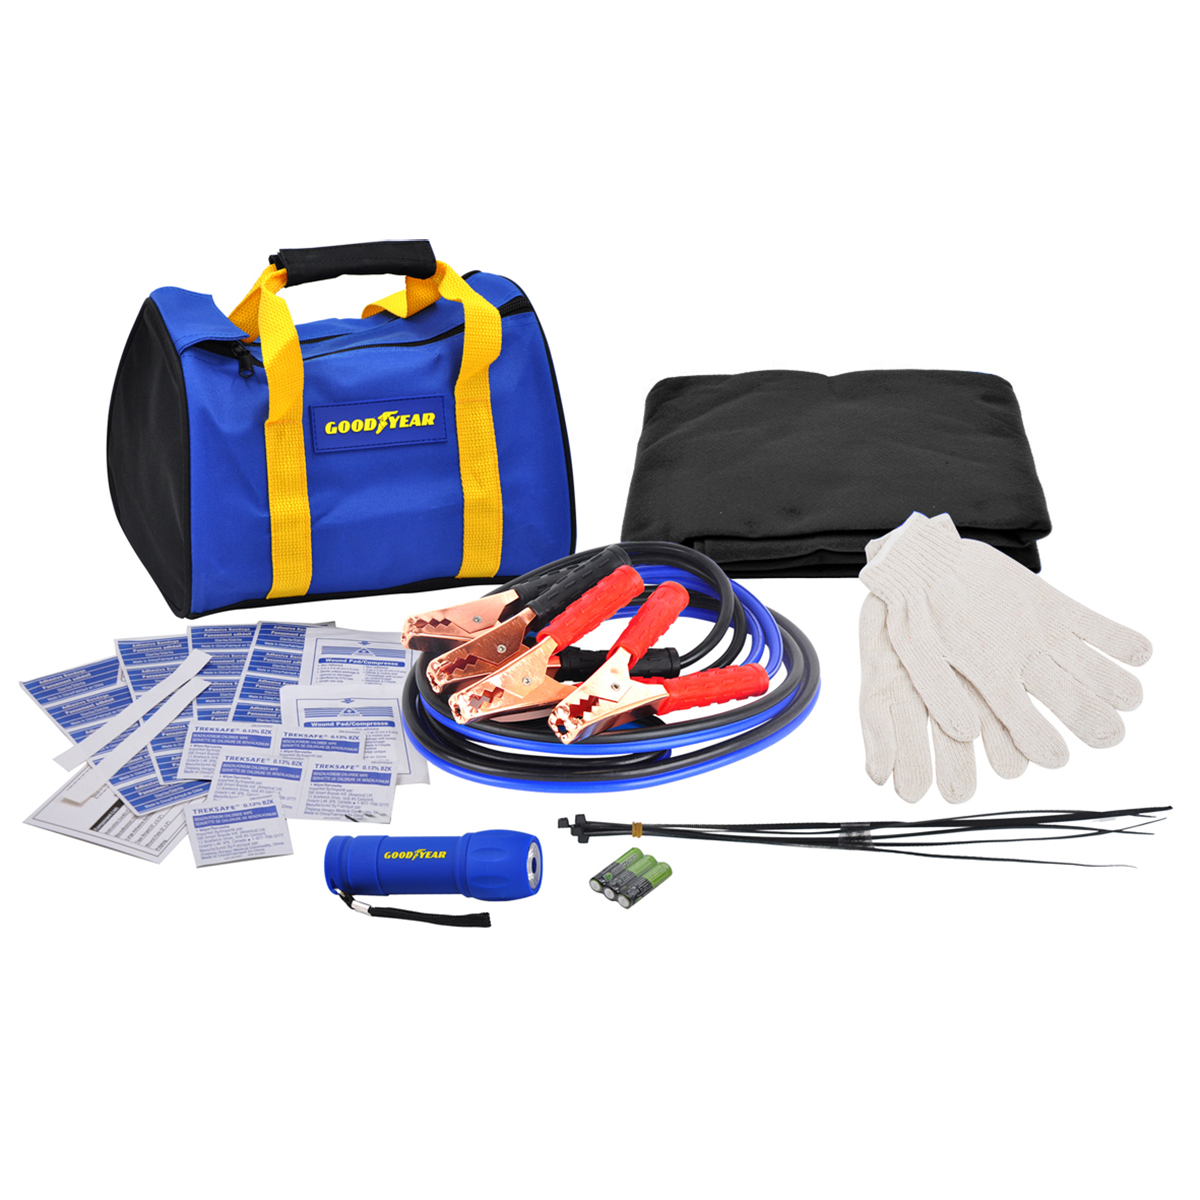 GoodYear Travel Safety Kit GY3005 Roadside Emergency Car Kit with Jumper Cables Winter Car Safety Kit